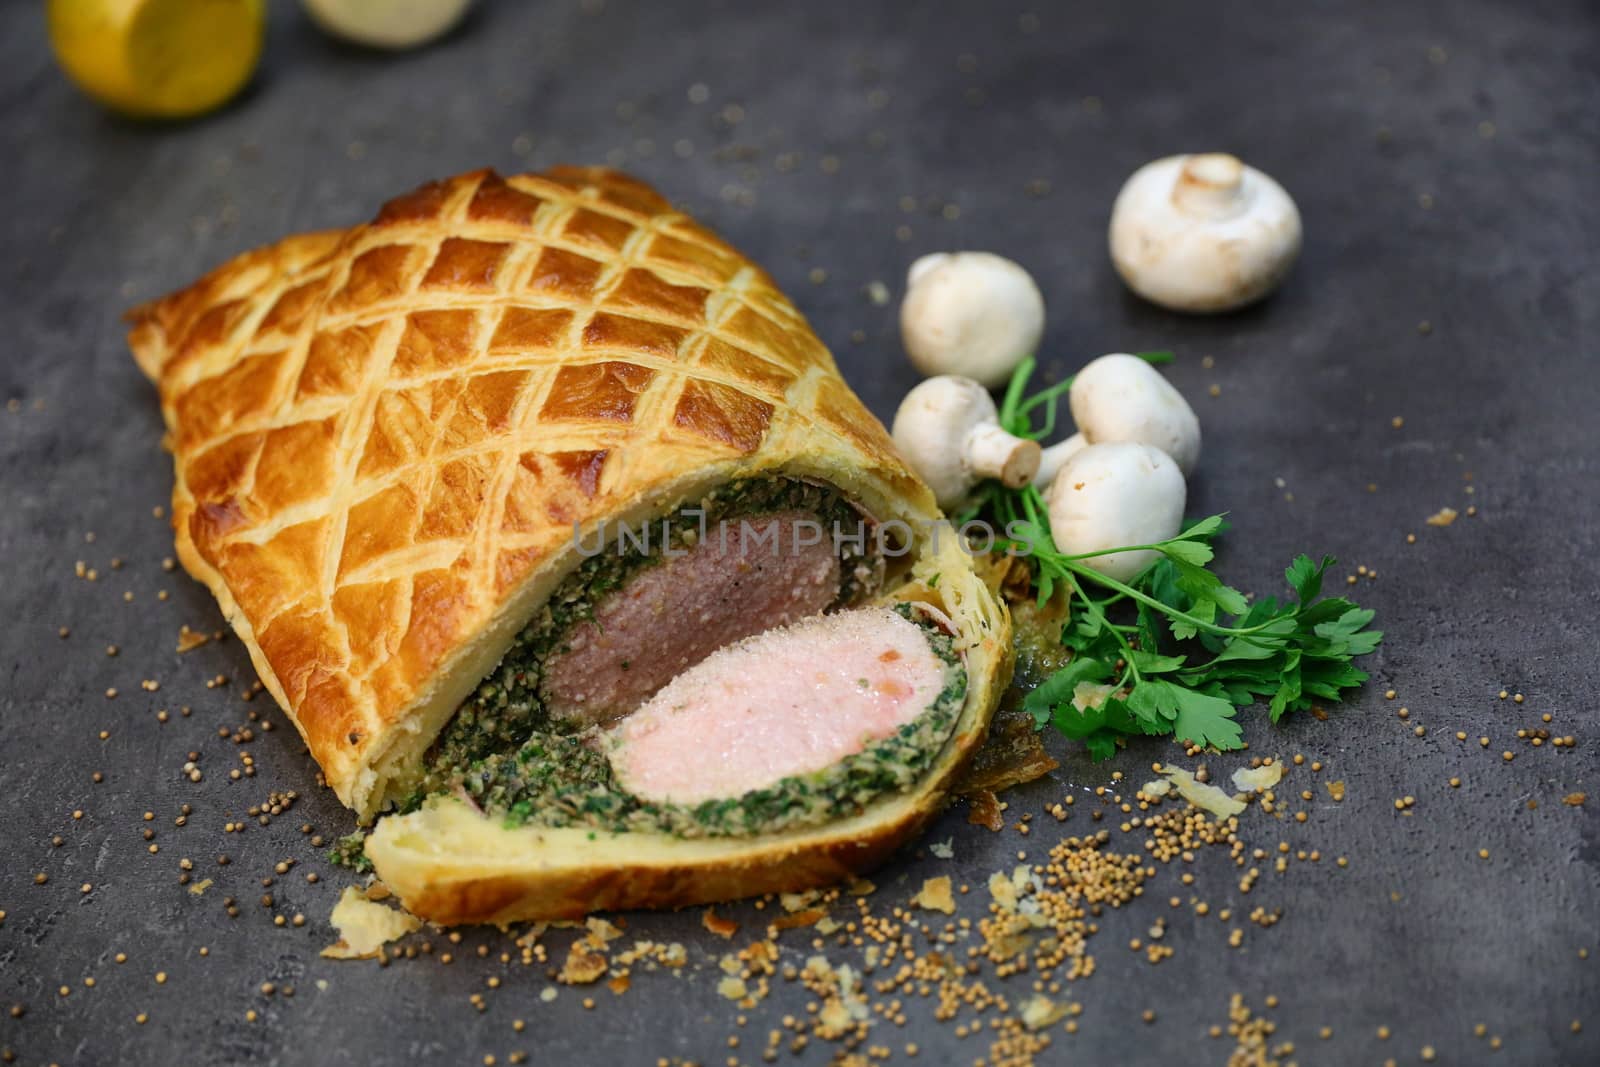 Fillet steak coated with pate de foie gras and duxelles, which is then wrapped in puff pastry and baked